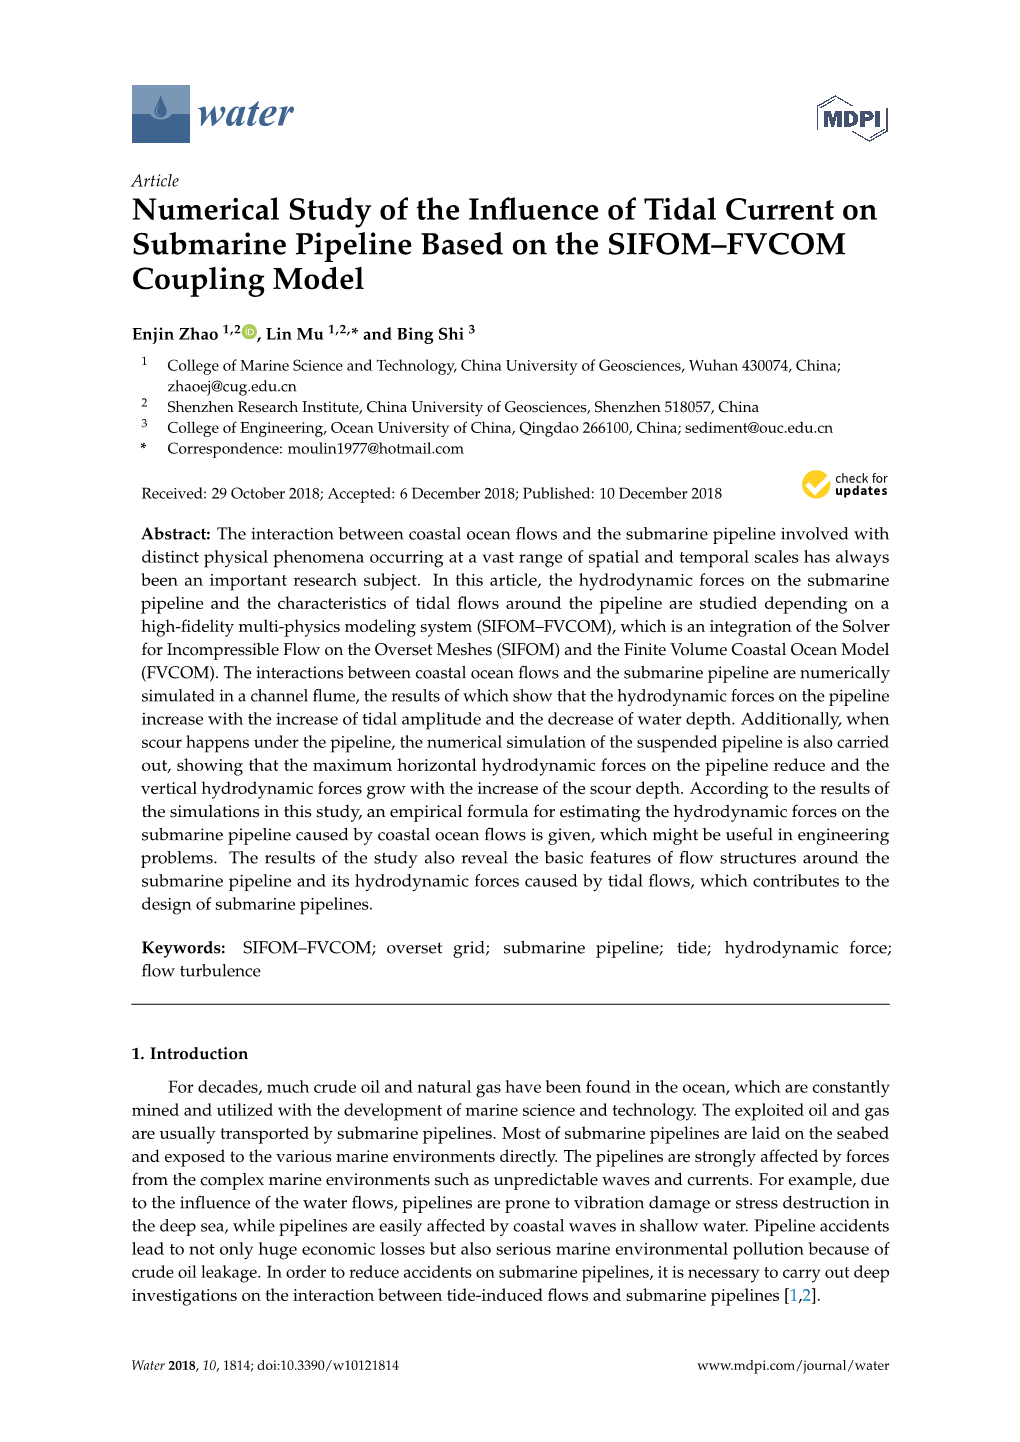 Numerical Study of the Influence of Tidal Current on Submarine Pipeline Based on the SIFOM–FVCOM Coupling Model